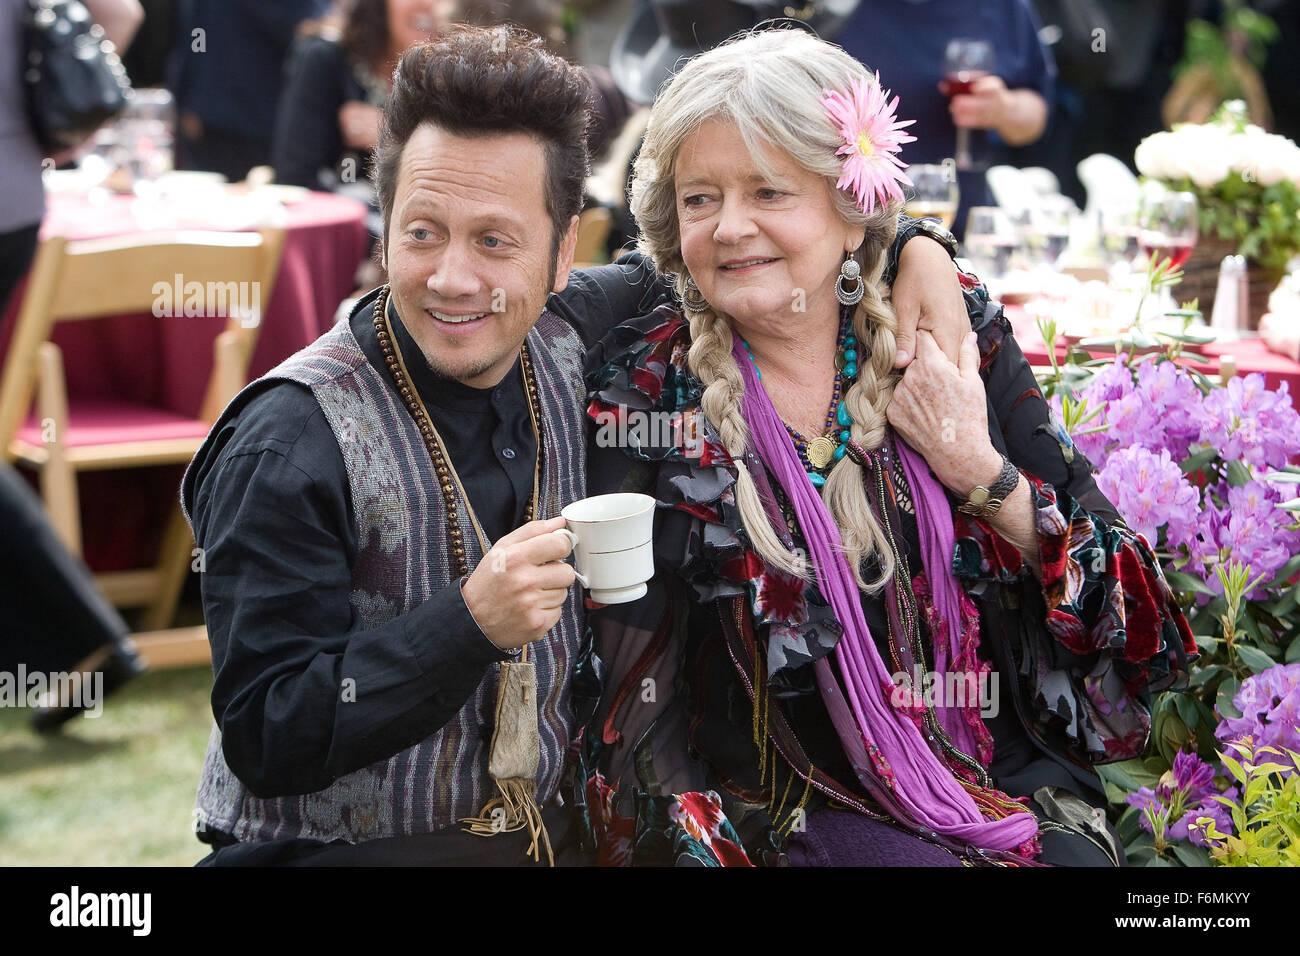 RELEASE DATE: June 25, 2010. MOVIE TITLE: Grown Ups. STUDIO: Columbia Pictures. PLOT: Thirty years after their high school graduation, five good friends reunite for a Fourth of July holiday weekend. PICTURED: ROB SCHNEIDER as Rob Hilliard and JOYCE VAN PATTEN as Gloria. Stock Photo